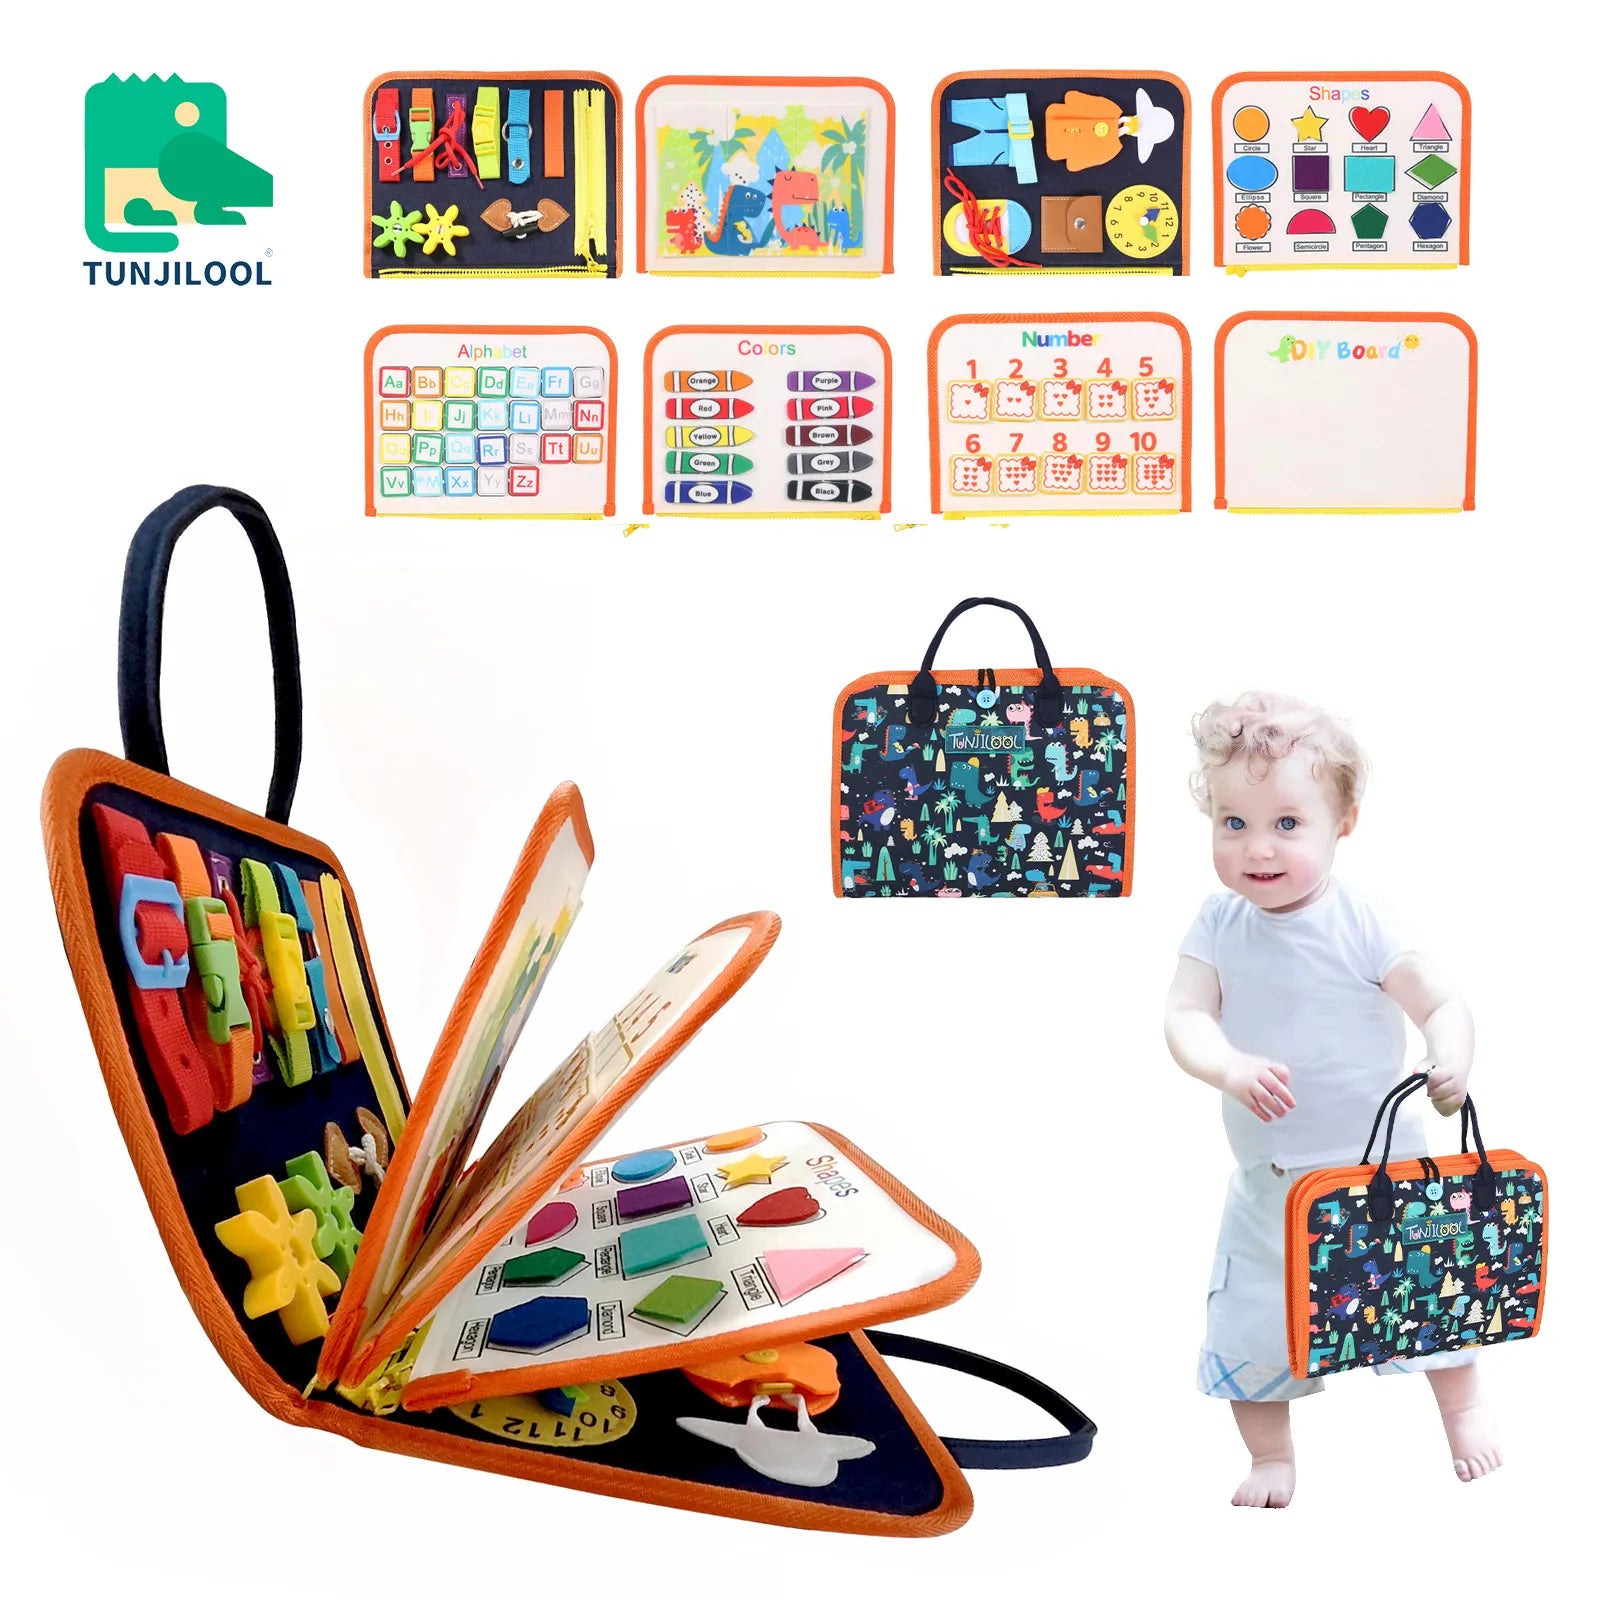 TUNJILOOL Montessori Parish Toys Busy Board Early Educational Toy For Toddler Baby Felt Cloth Story Book 3D Shape Color Match  petlums.com   